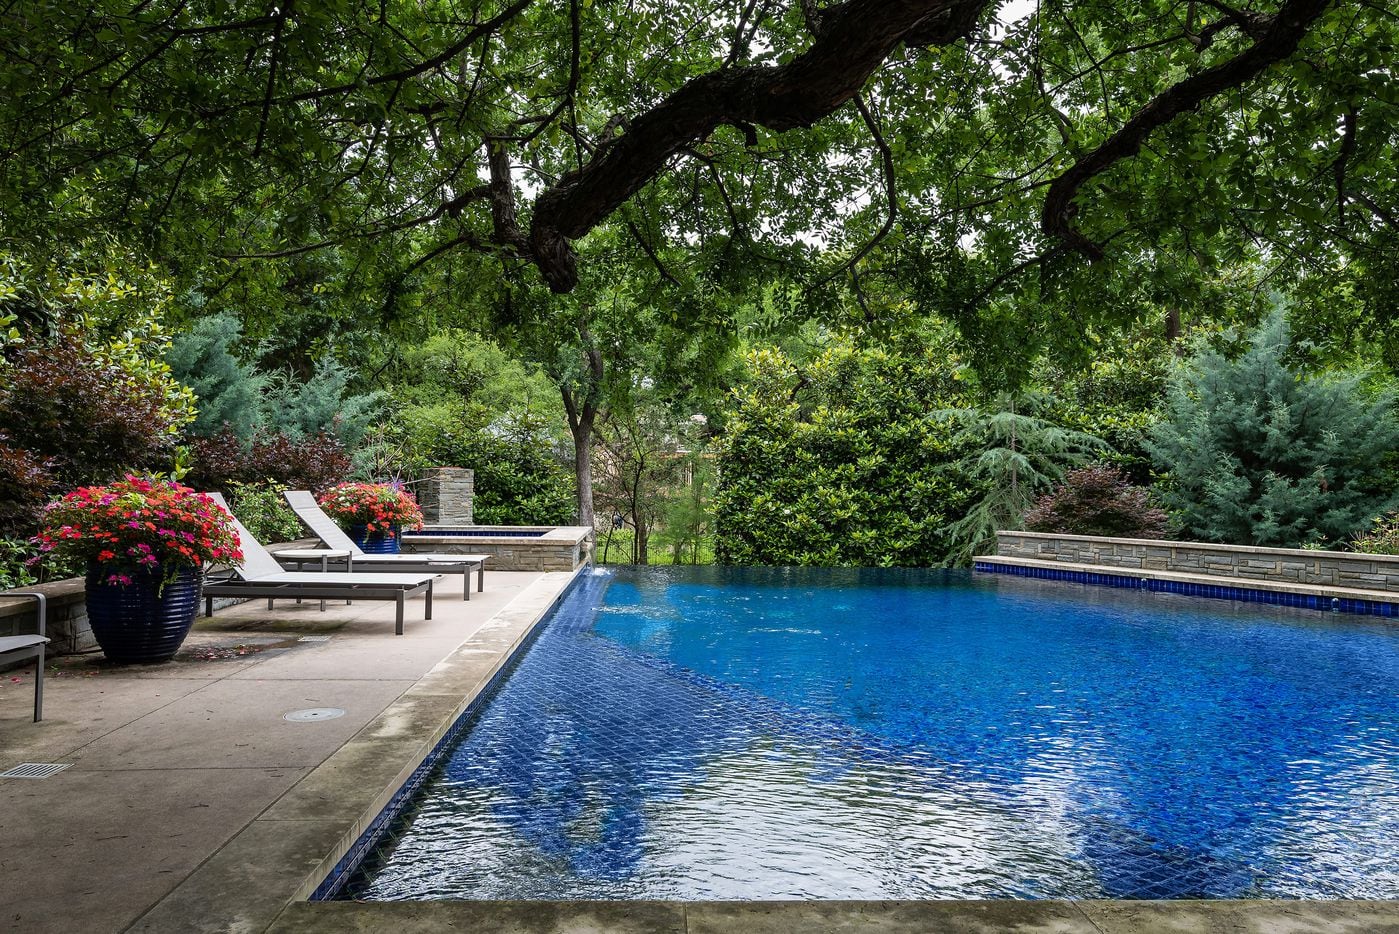 The terraced courtyard at 9024 Broken Arrow Lane allows for several outdoor entertainment areas.  There is also an infinity pool that flows into a body of water.